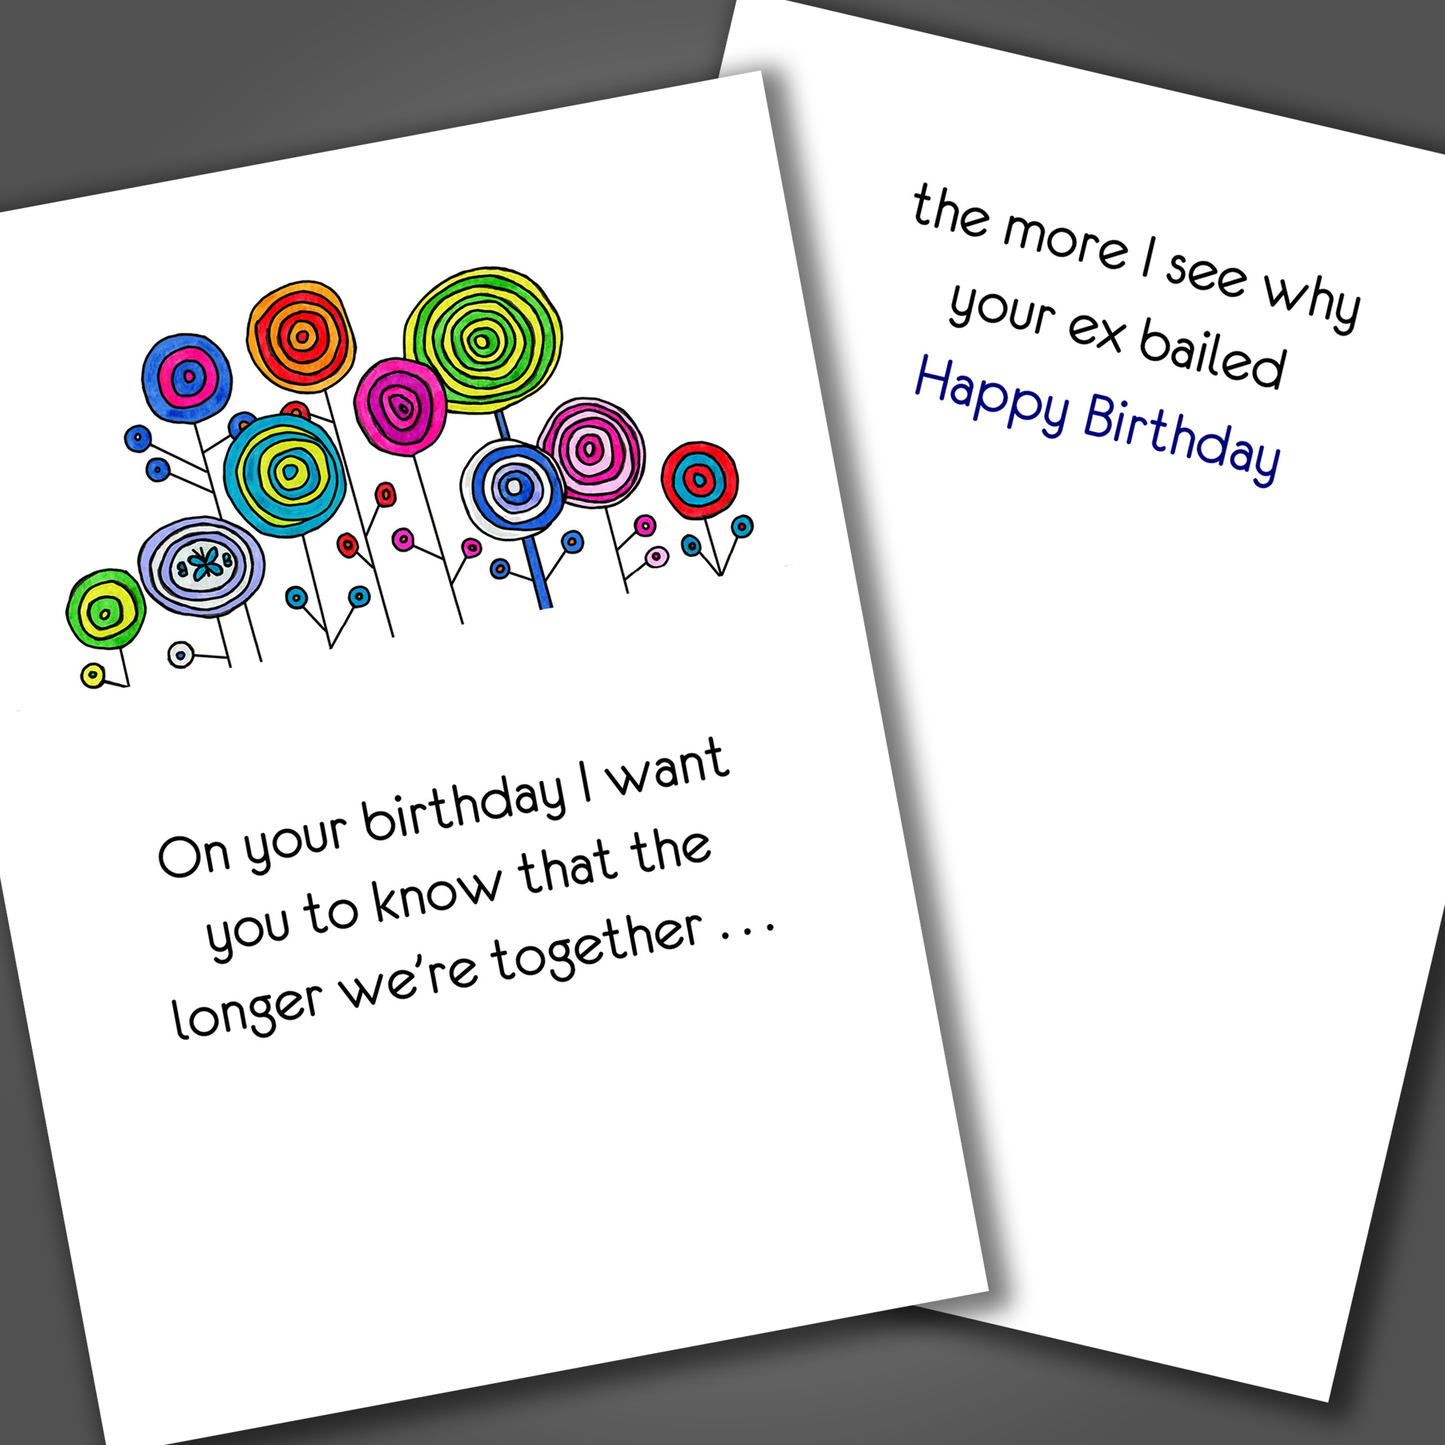 Funny birthday card for someone you are dating with with circle flowers drawn on the front of the card. Inside of the card is a funny joke that says the longer we are together the more I see why your ex bailed!